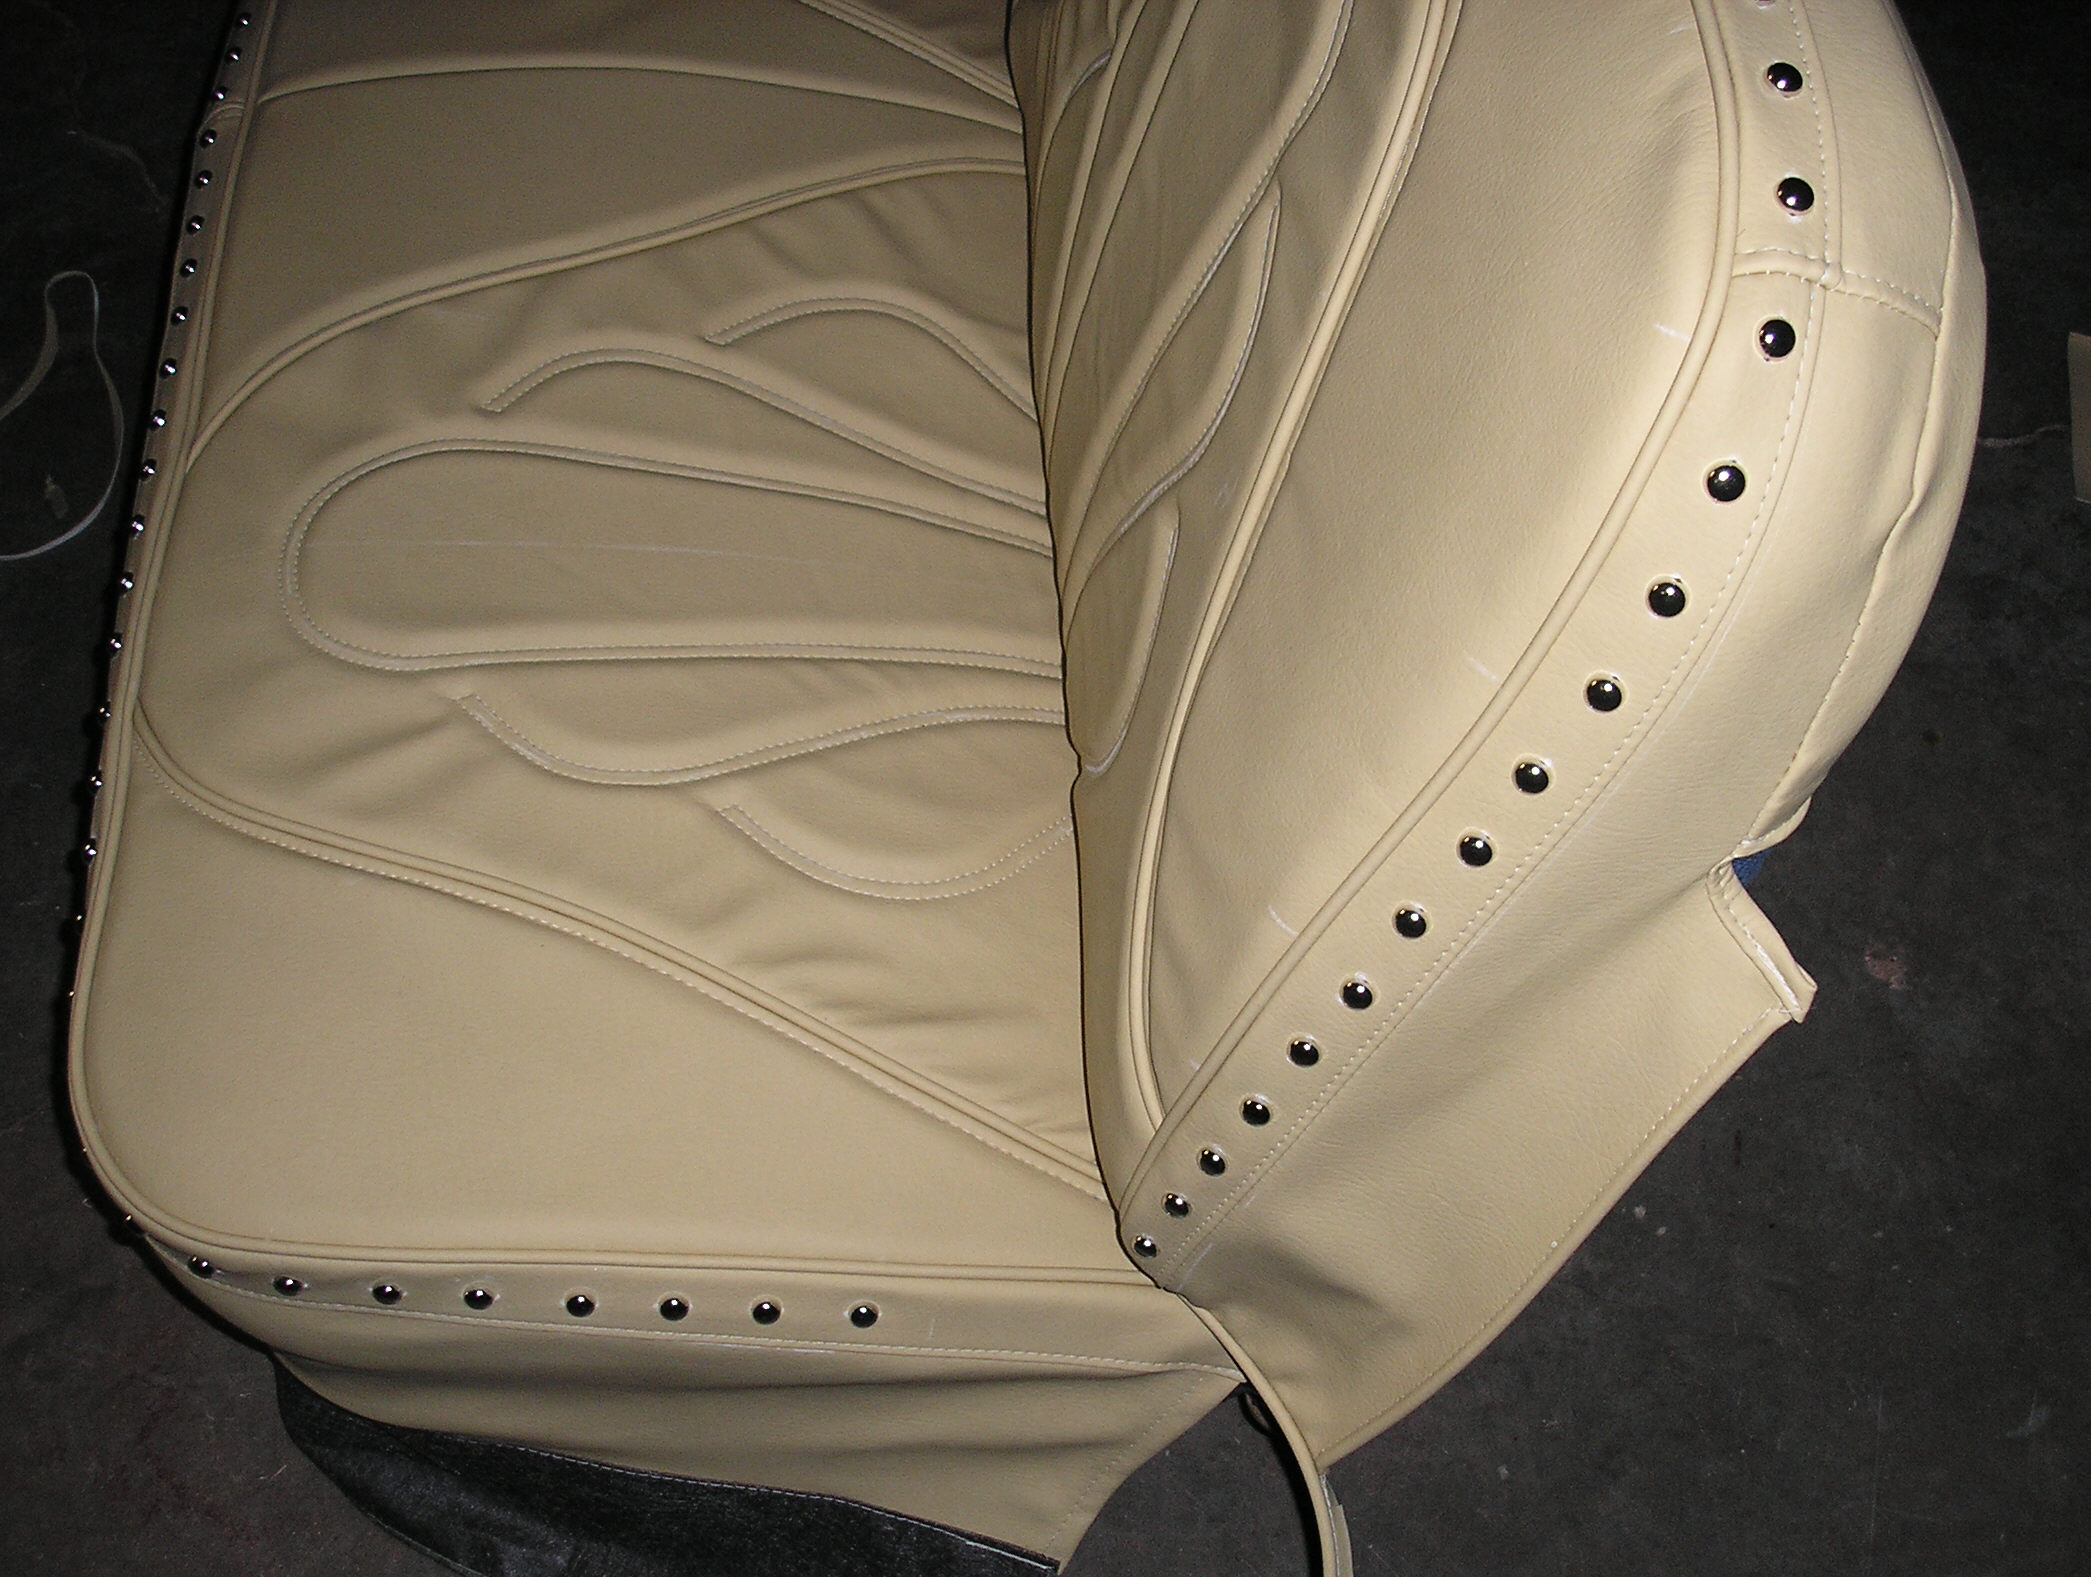 60-87 Truck seat cover